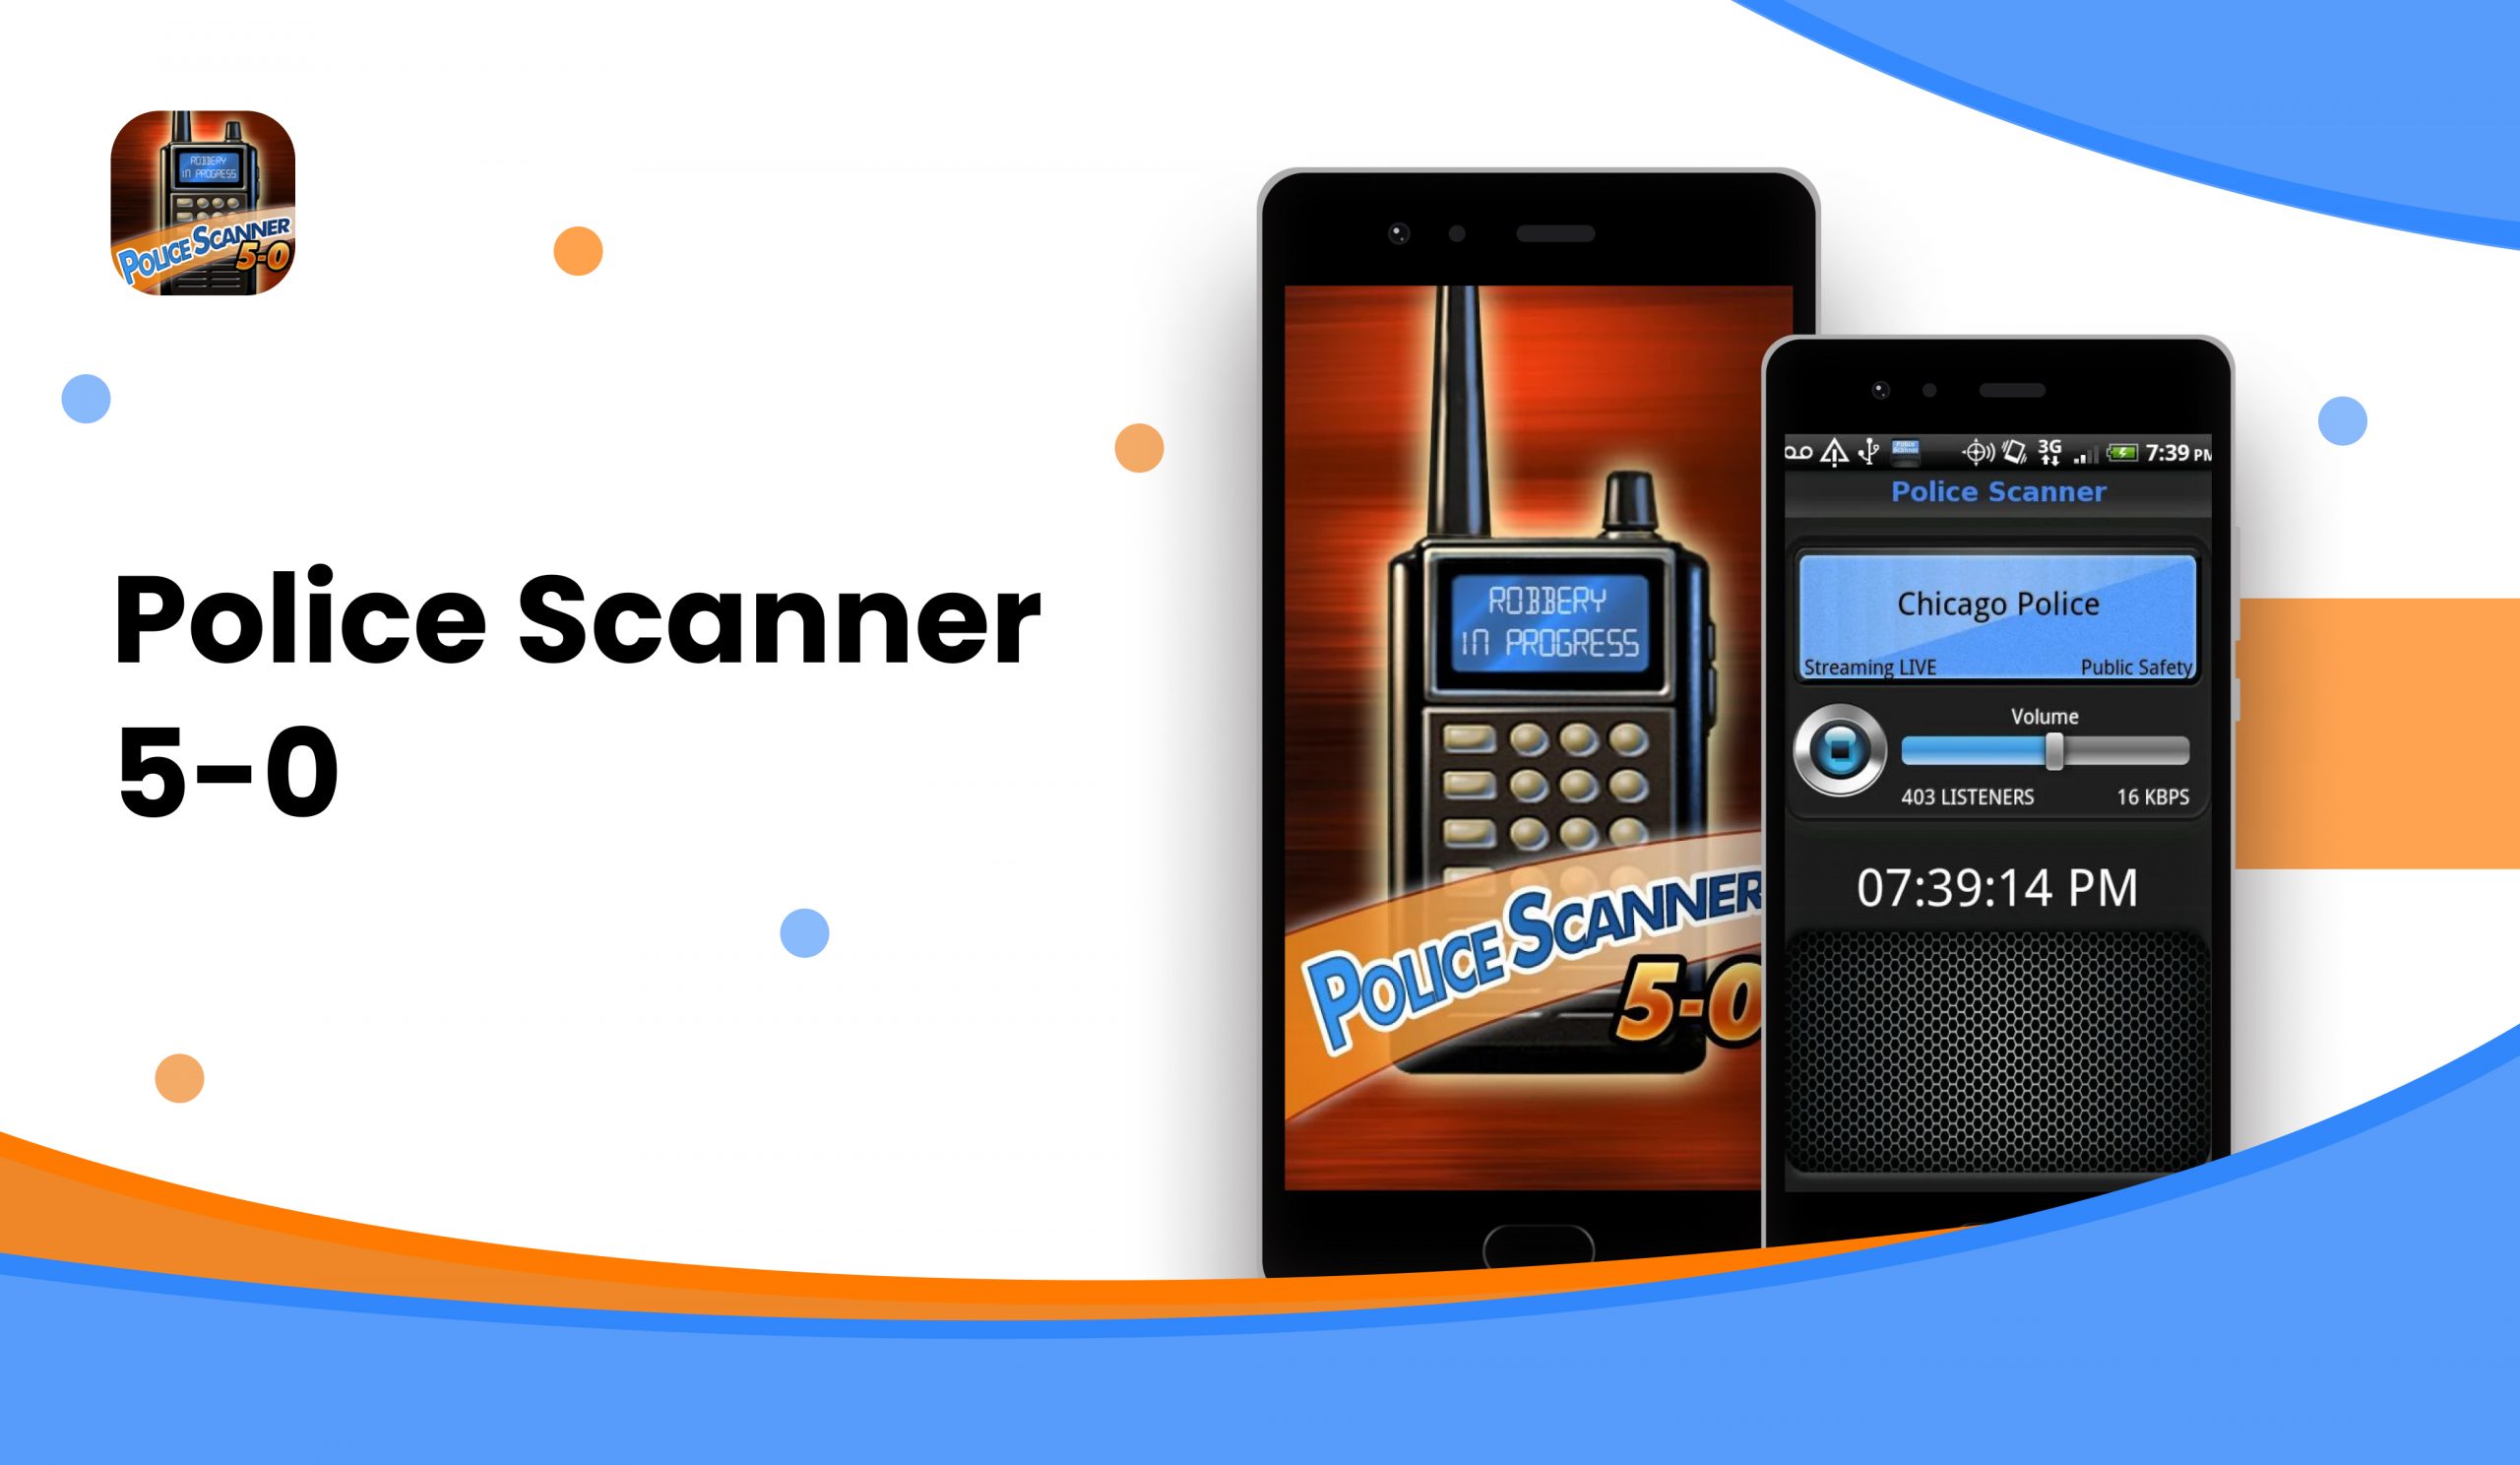 Scanner Radio - Listen to Live Police and Fire Radio Streams on